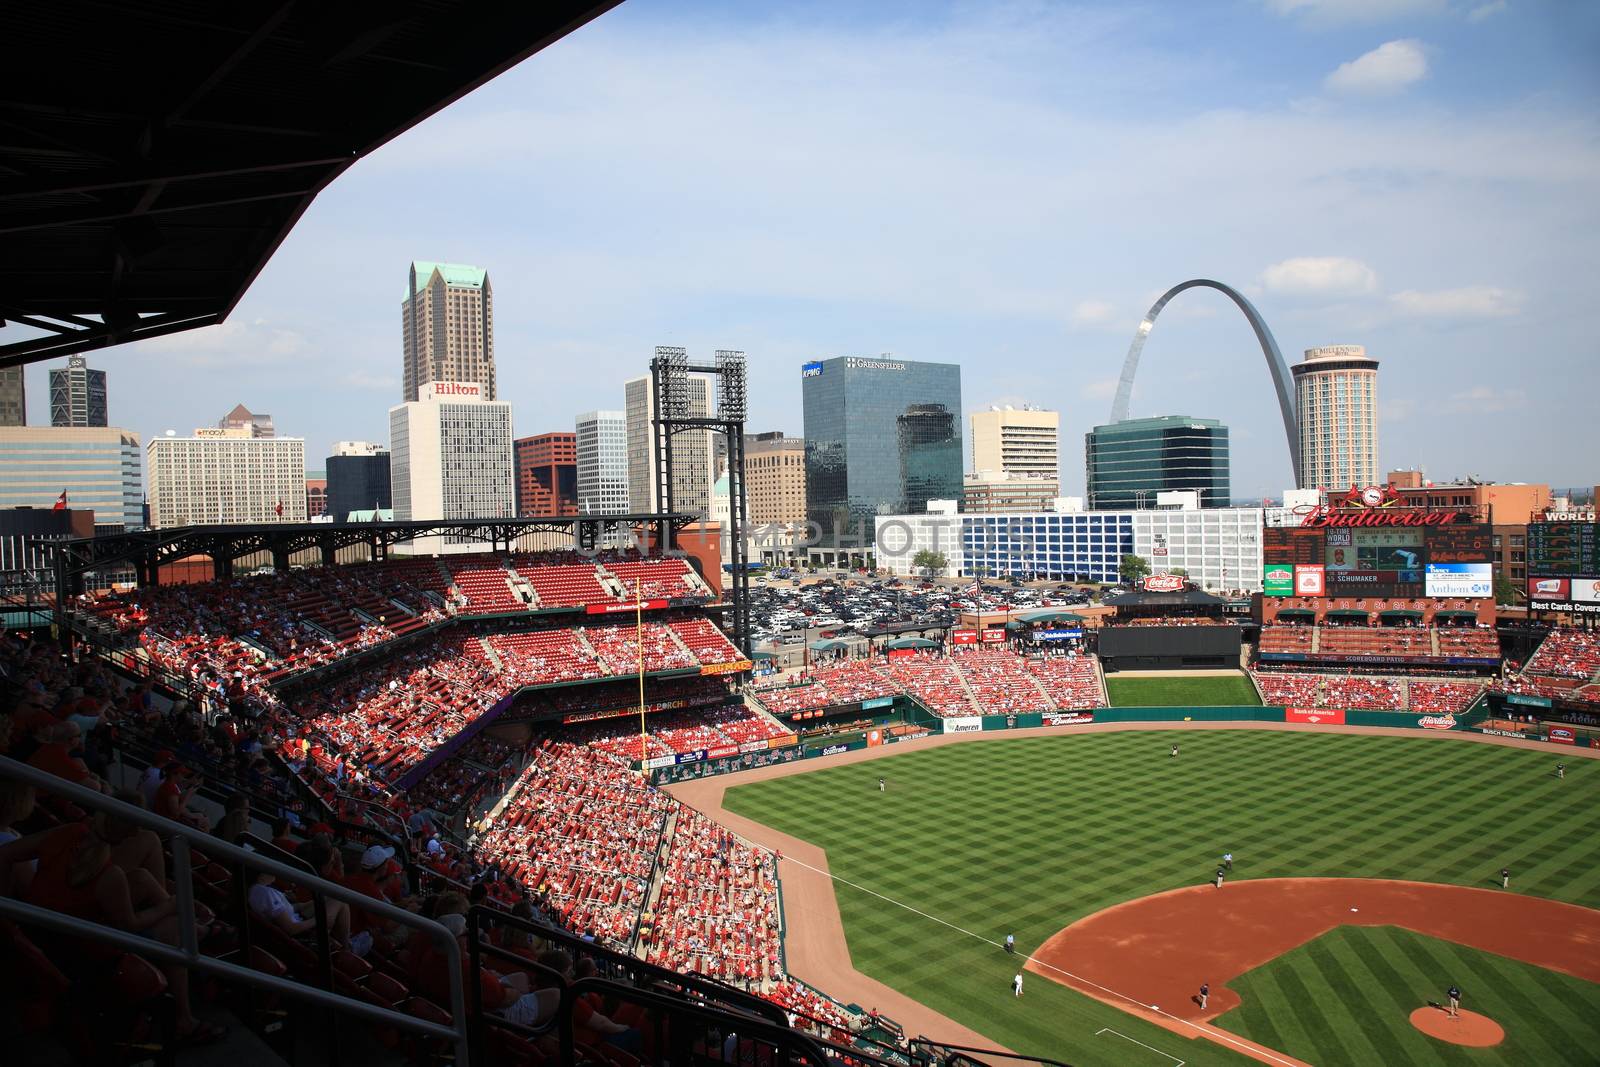 The Gateway Arch towers over a Cardinals game at Busch Stadium in St. Louis.